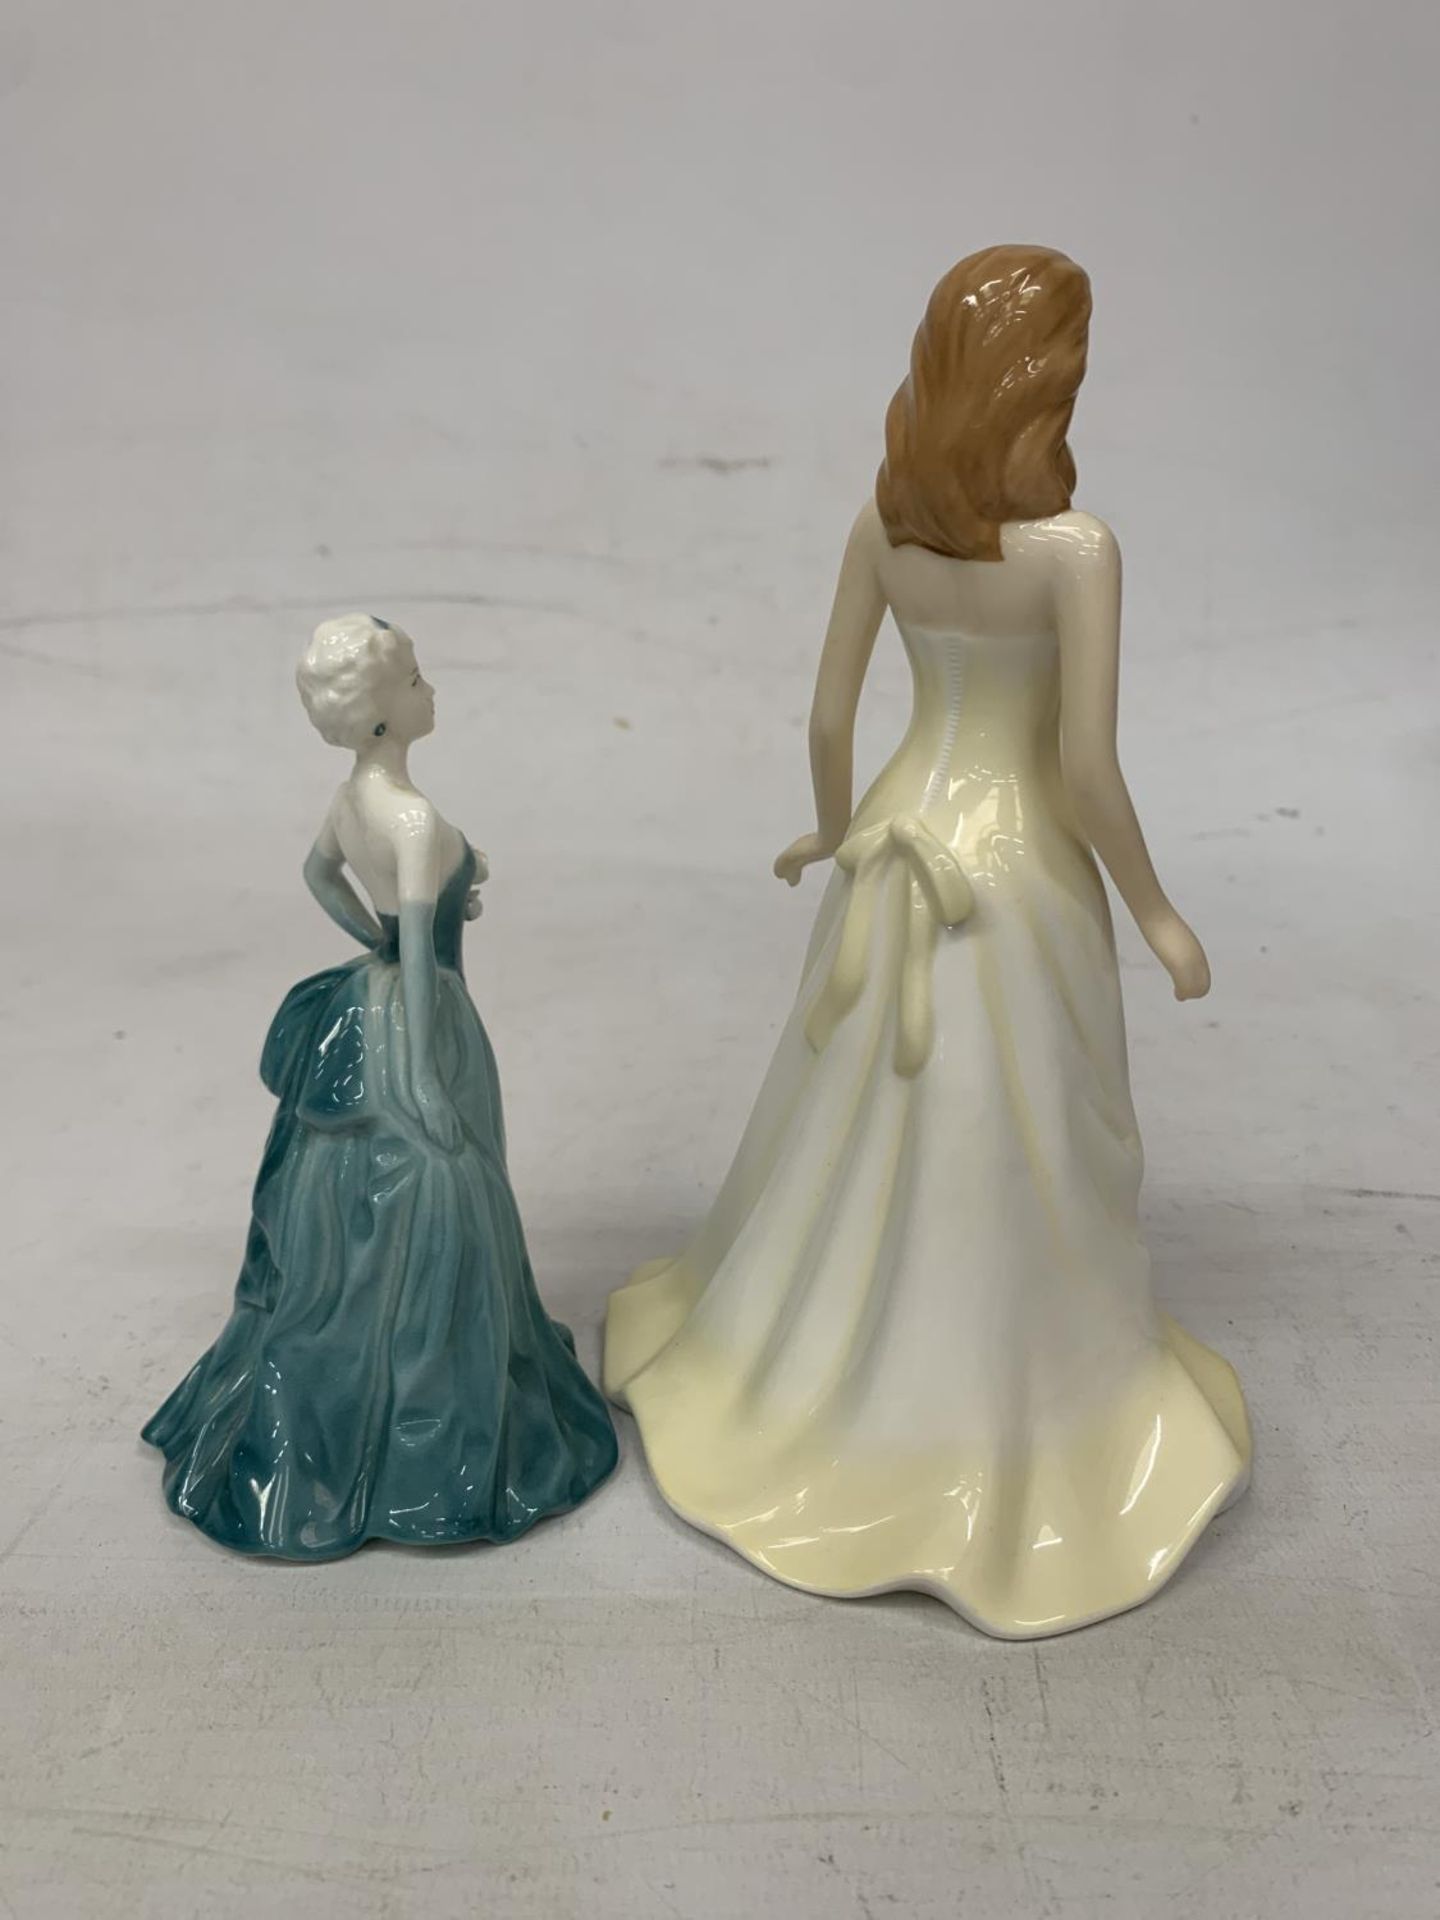 A ROYAL DOULTON FIGURE FROM THE GEMSTONES COLLECTION JUNE "PEARL" AND A SMALL COALPORT FIGURE - Image 2 of 3